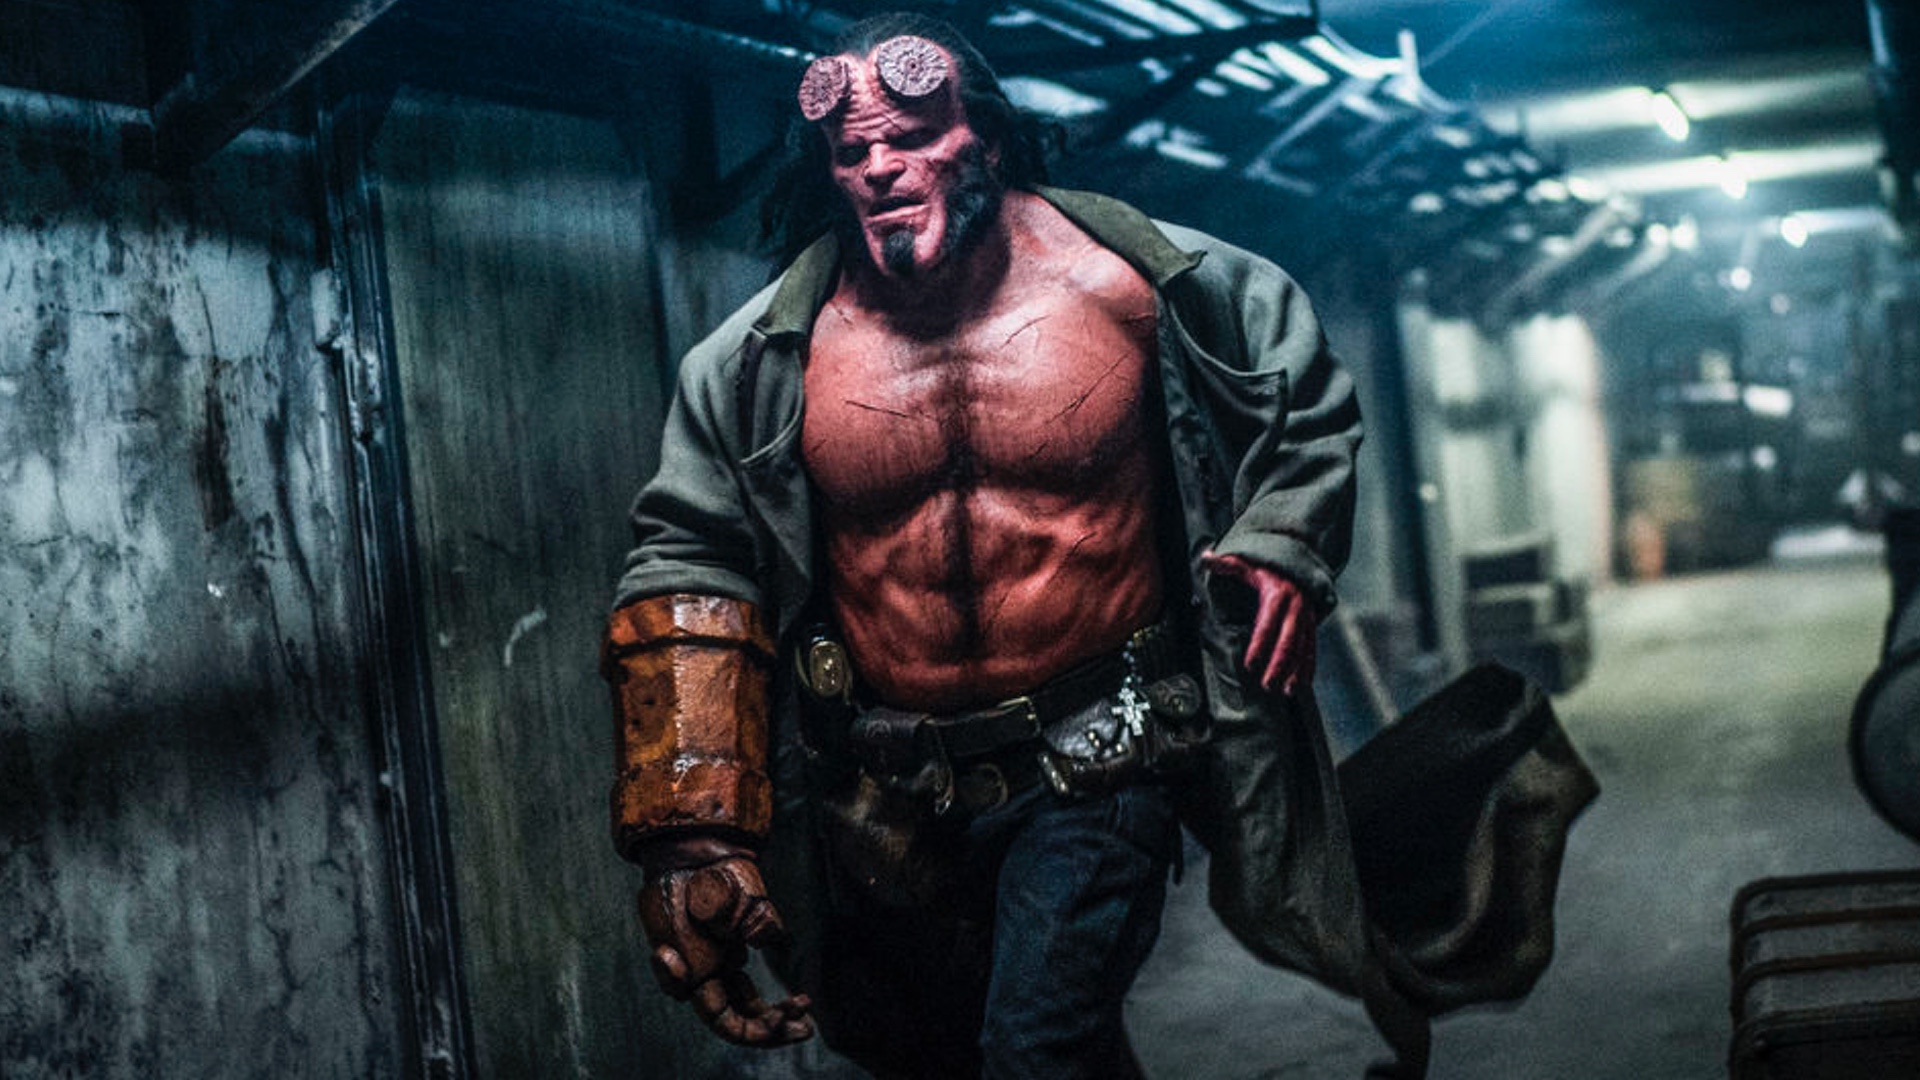 Living Up To Massive Promises and Expectations, Hellboy Is Rated R